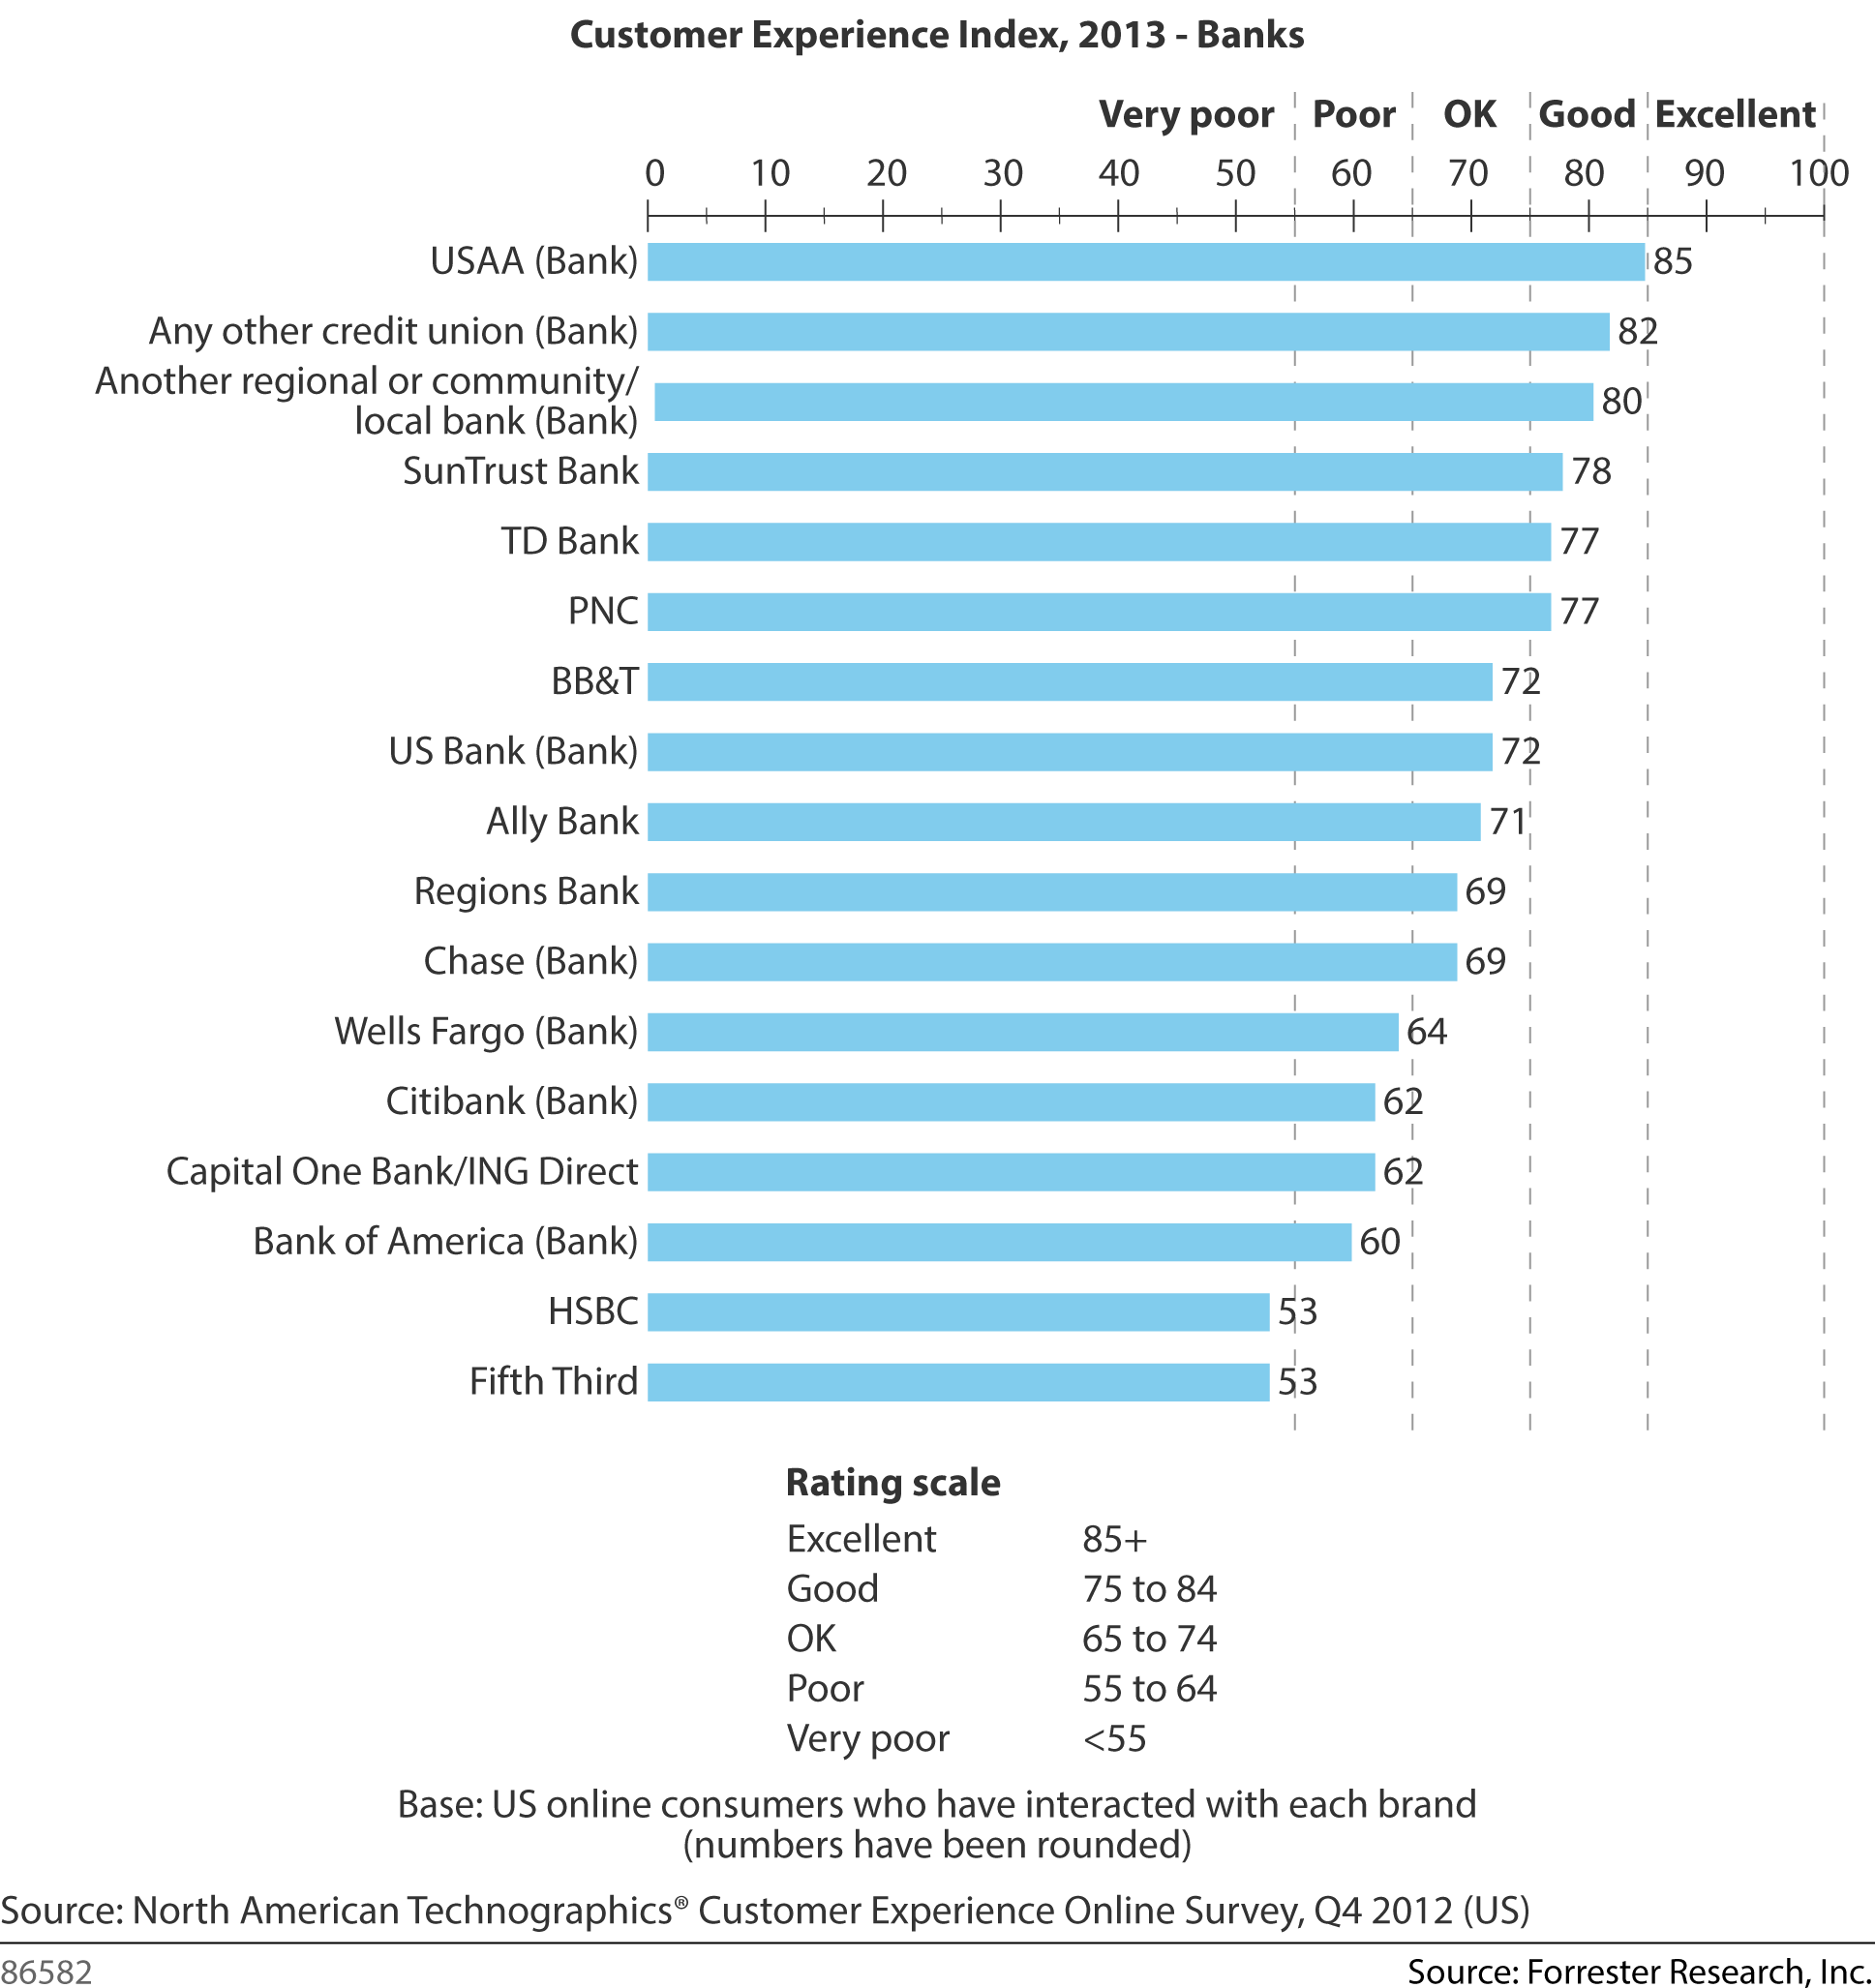 Forrester Customer Experience Index - 2013 - Banks